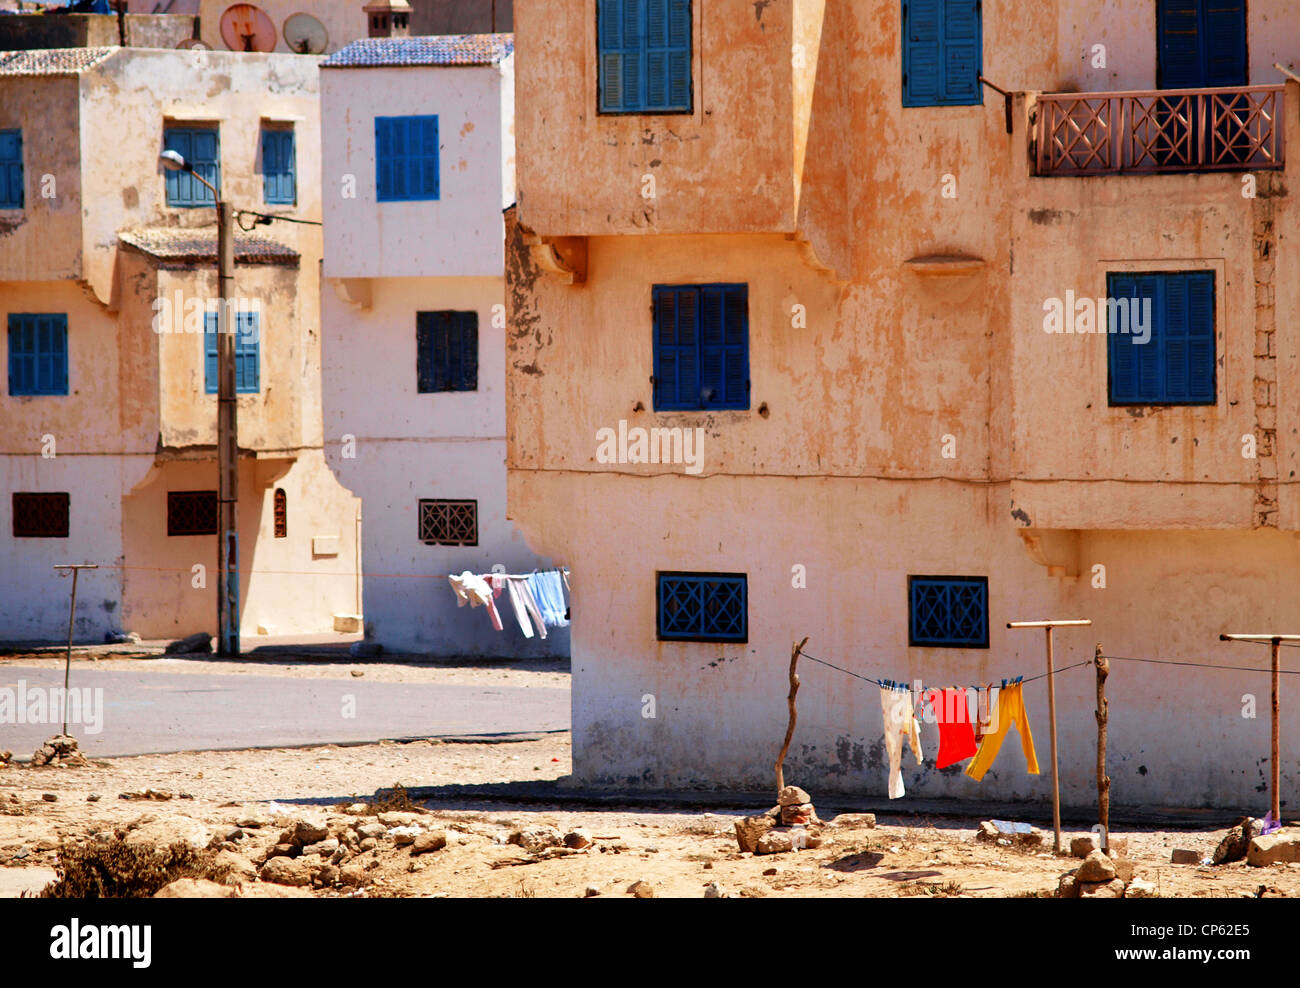 Residential buildings in the new town of Essaouira Morocco Stock Photo